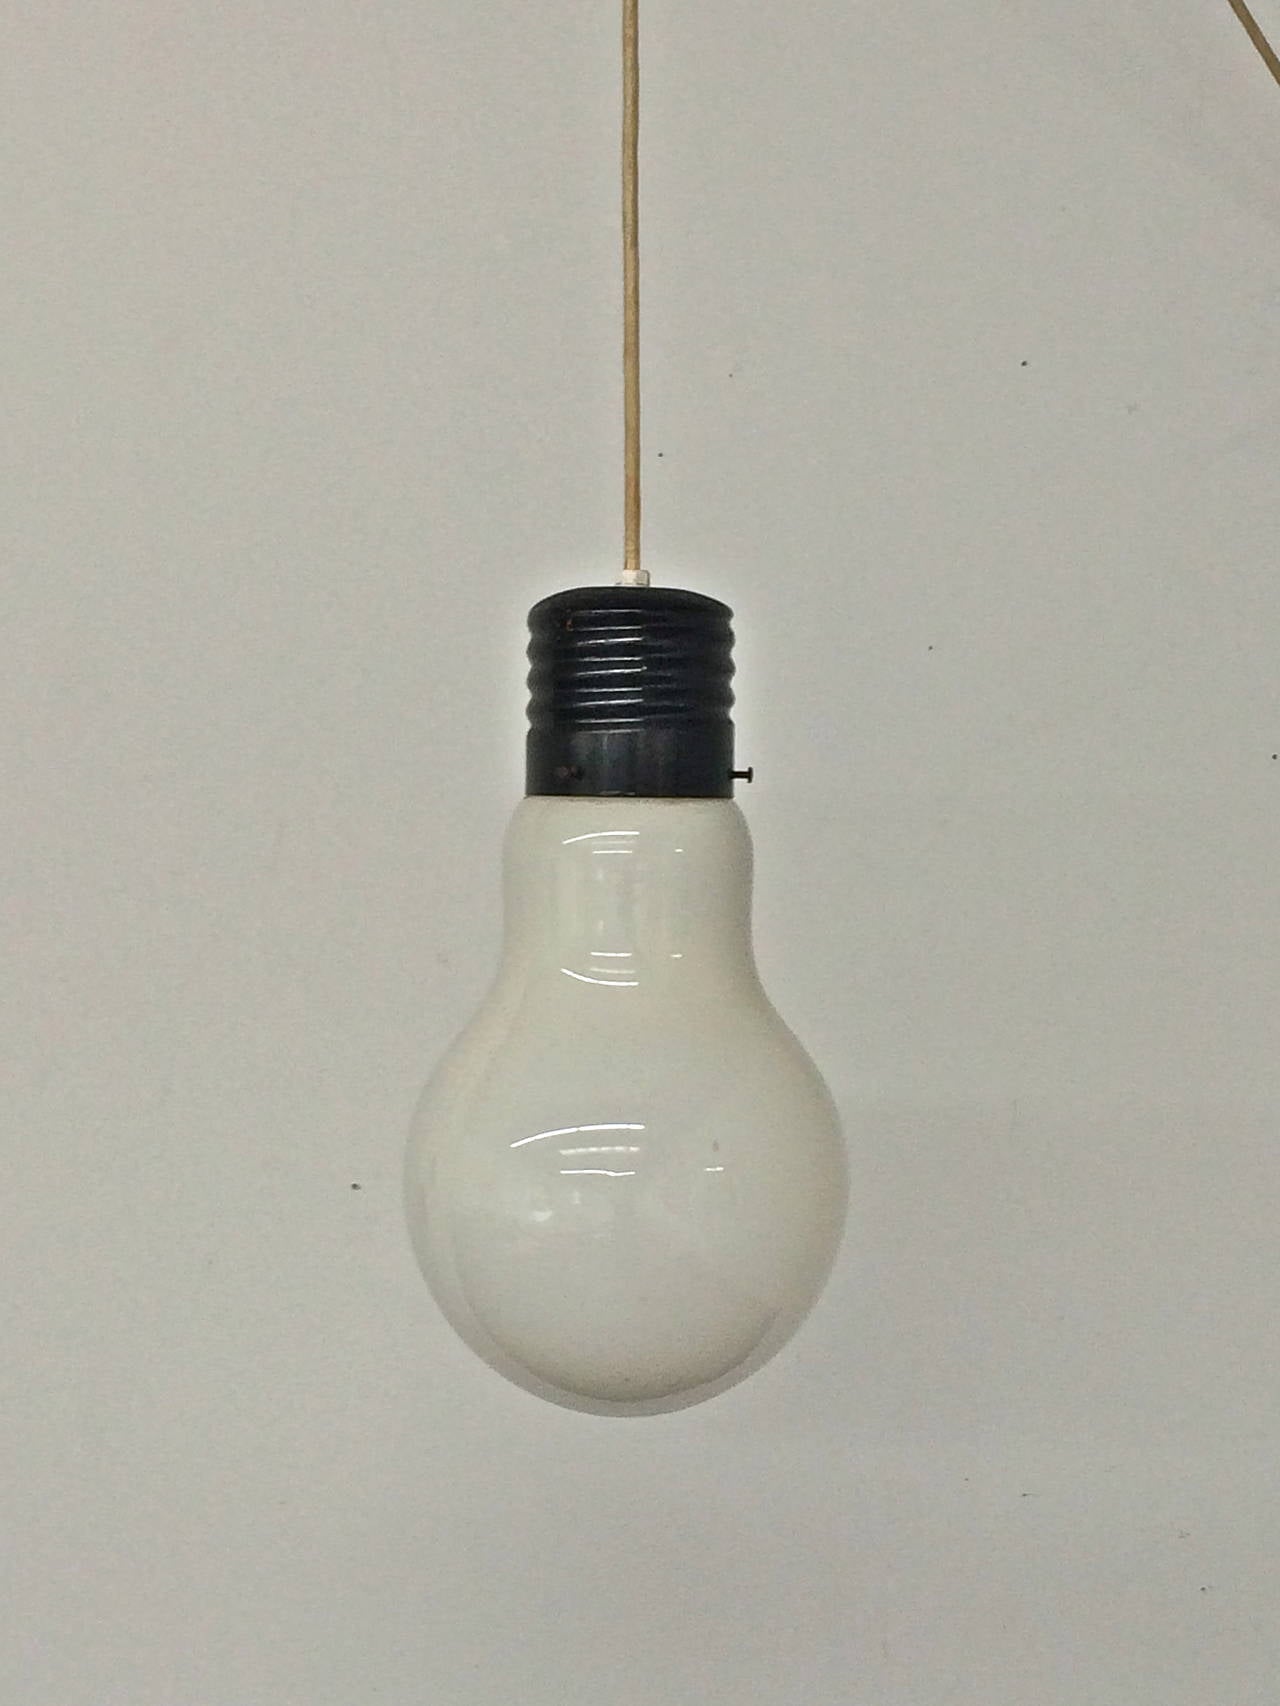 Pop Art  Light Bulb Lamp
Attributed to Ingo Maurer
Circa 1960s-1970
glass, metal
17 x 10.5 inches in diameter
Very good condition